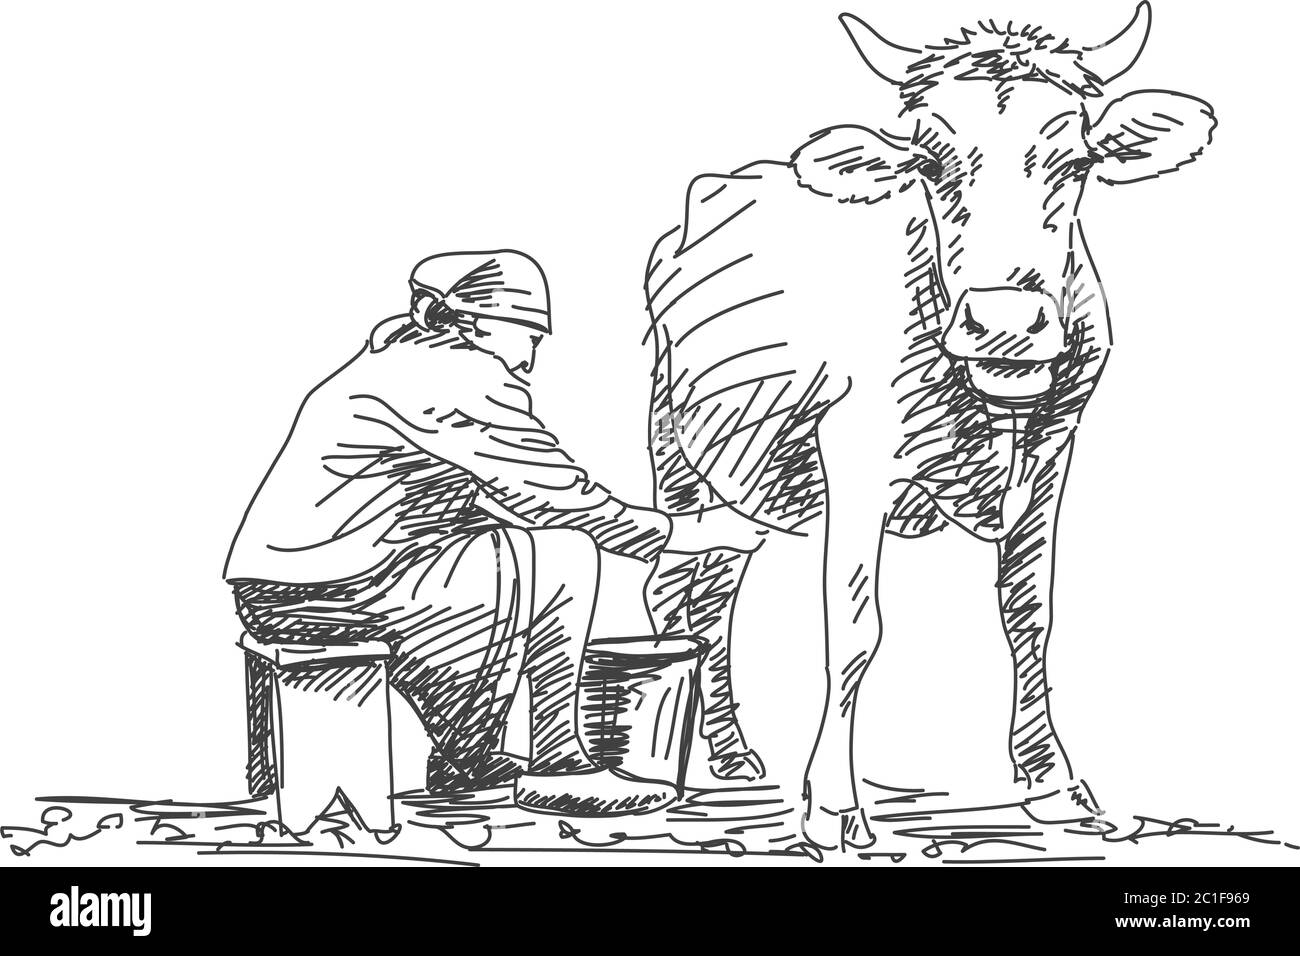 Sketch of woman milking a cow by hand Hand drawn vector illustration Stock Vector